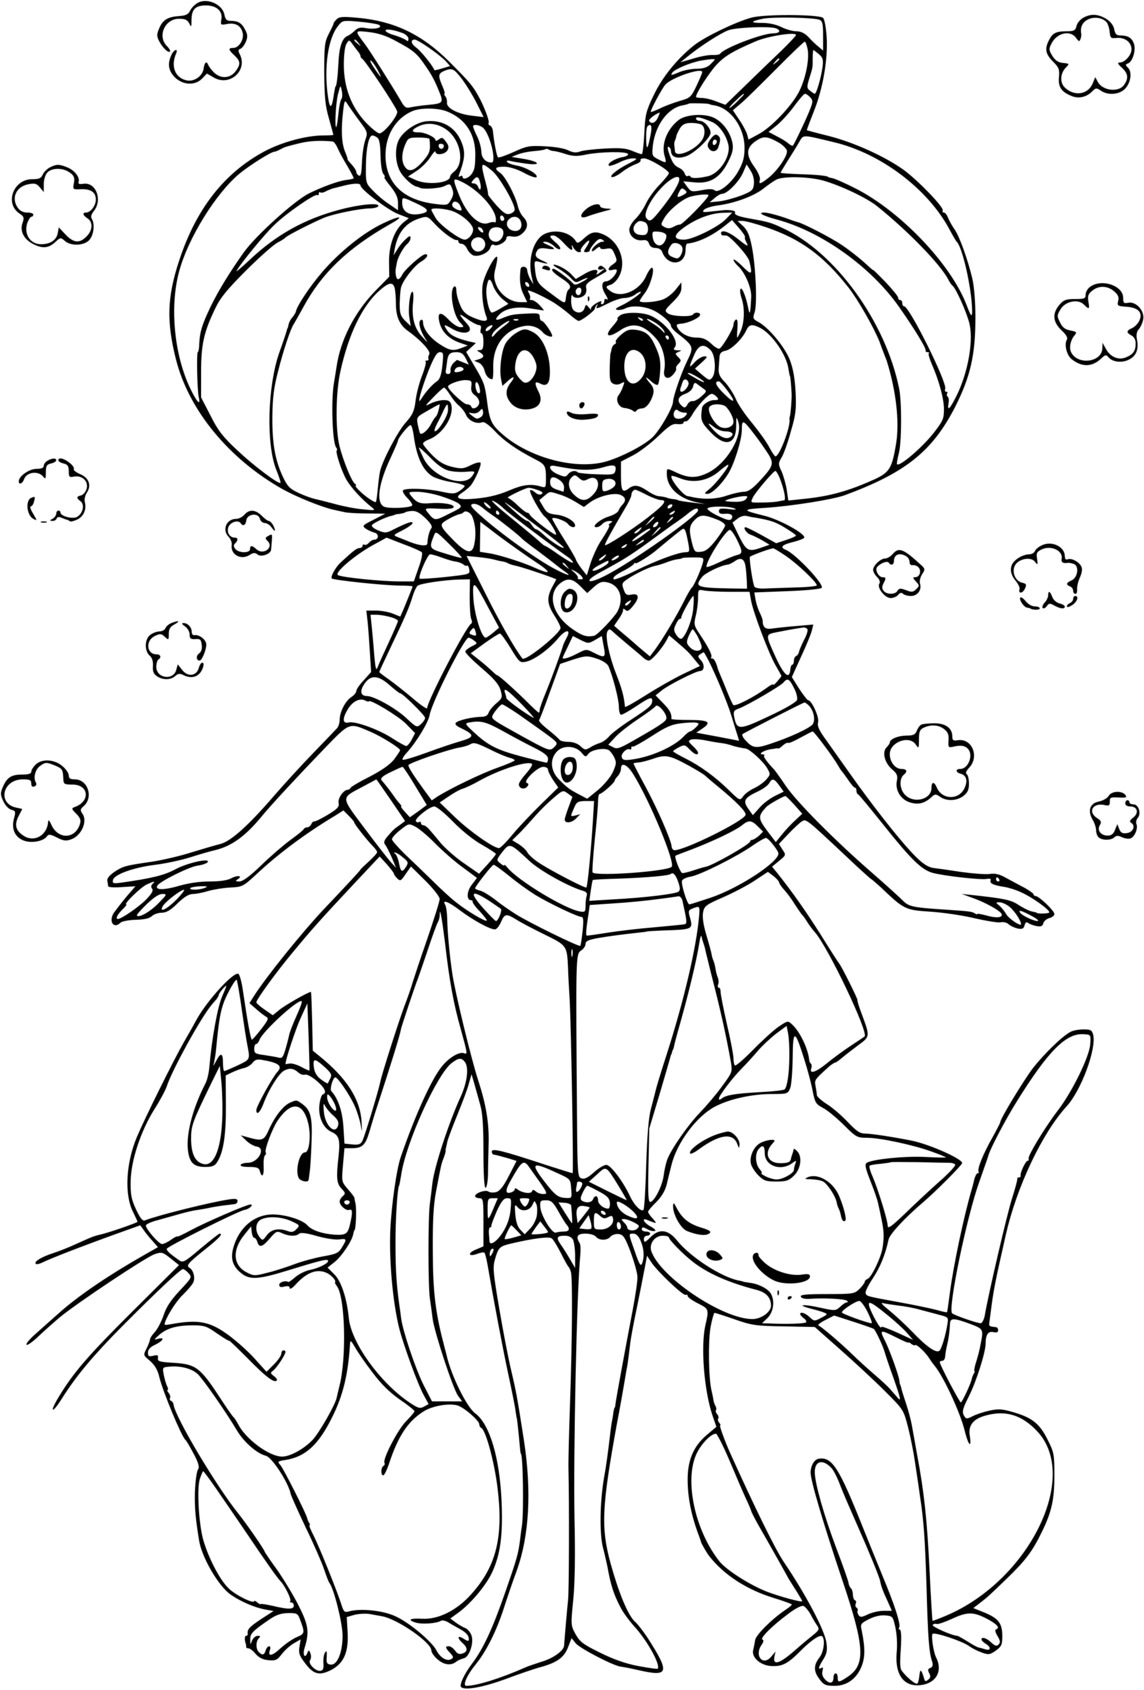 Sailor Moon And Cats Coloring Page